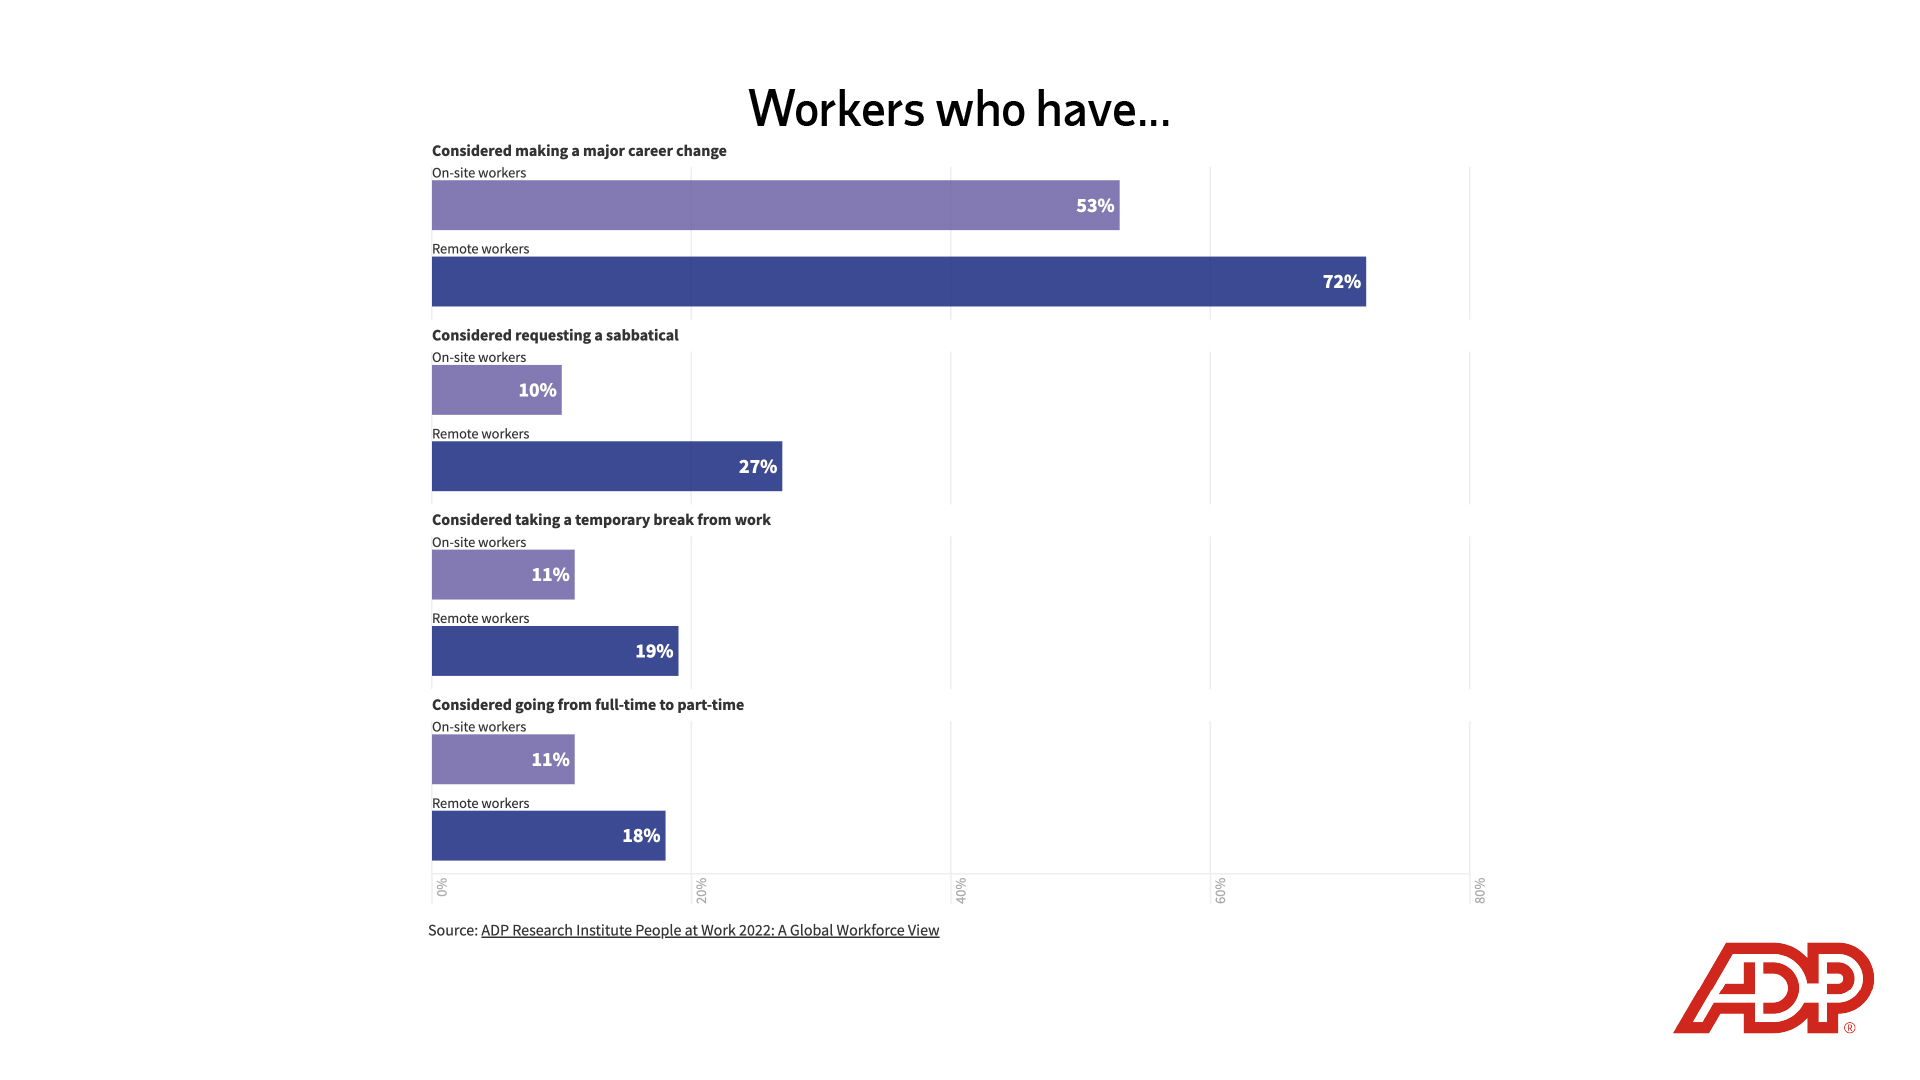 Image description: Poll results depicting "workers who have...considered making a major career change"; on-site workers, 53%; remote workers, 72%; "...considered requesting a sabbatical"; on-site workers, 10%, remote workers, 27%; "...considered taking a temporary break from work"; on-site workers, 11%; remote workers, 19%; "...considered going from full-time to part-time"; on-site workers, 11%; remote workers, 18%. End of alt text.